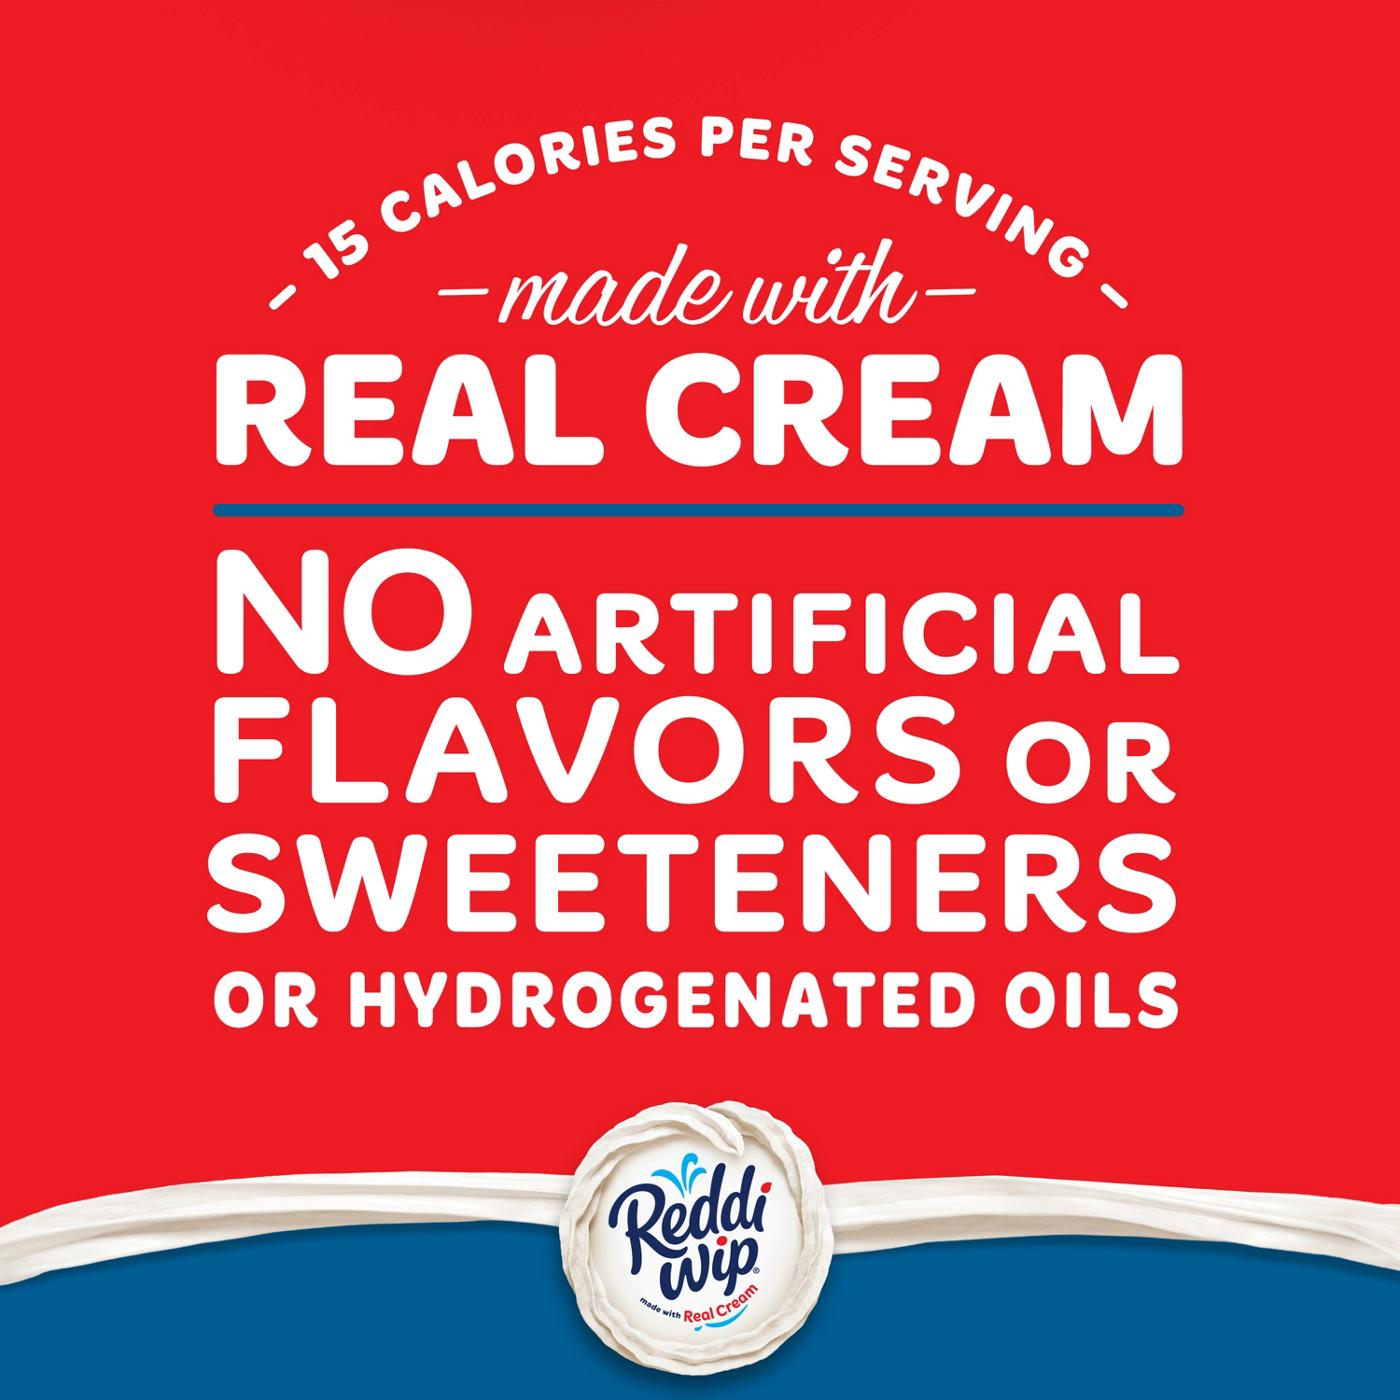 Reddi Wip Original Whipped Topping Made With Real Cream Shop Sundae Toppings At H E B